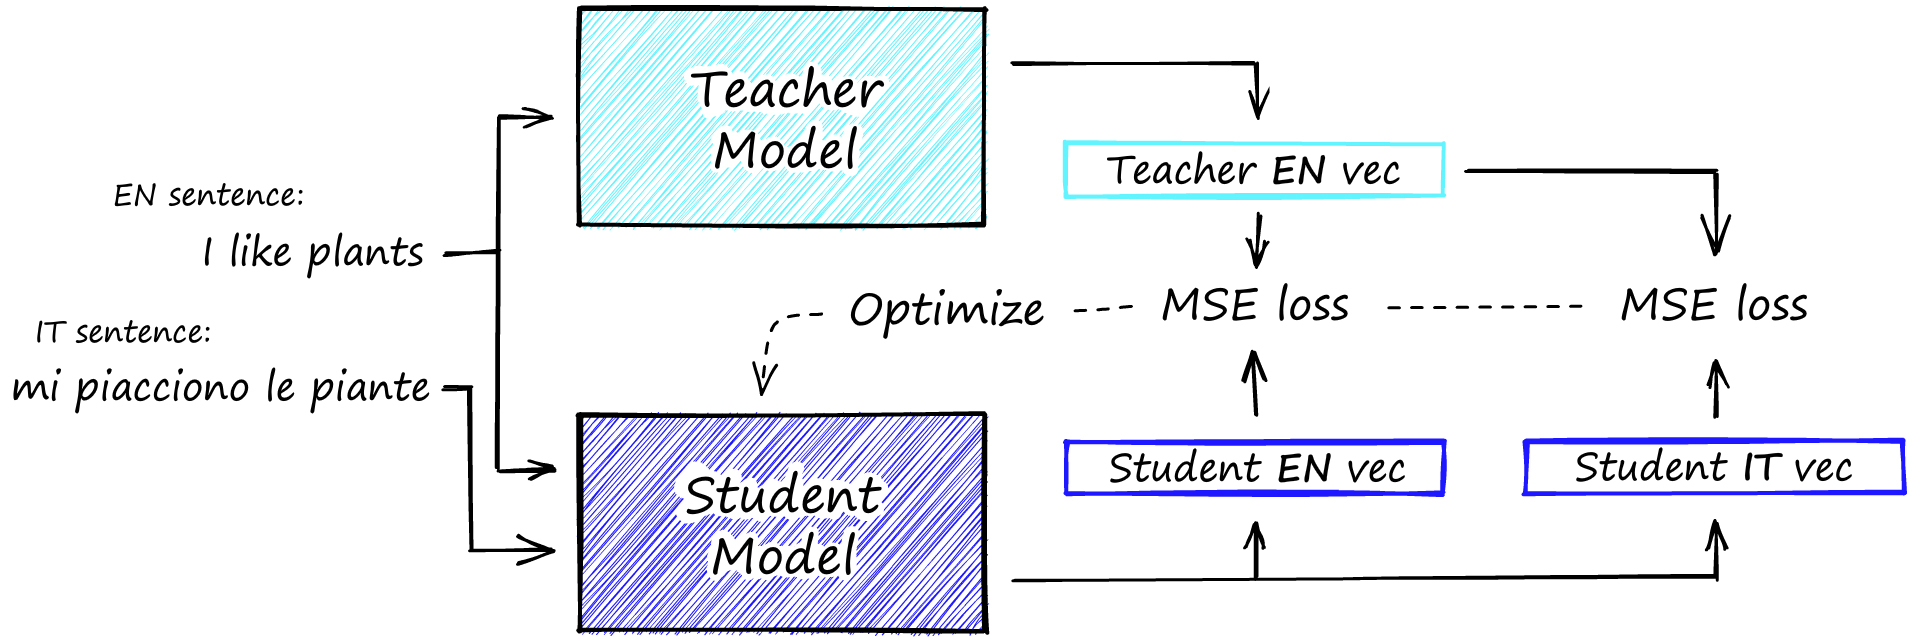 Chart showing the flow of information from parallel pairs through the teacher and student models and the optimization performed using MSE loss. Adapted from [1].